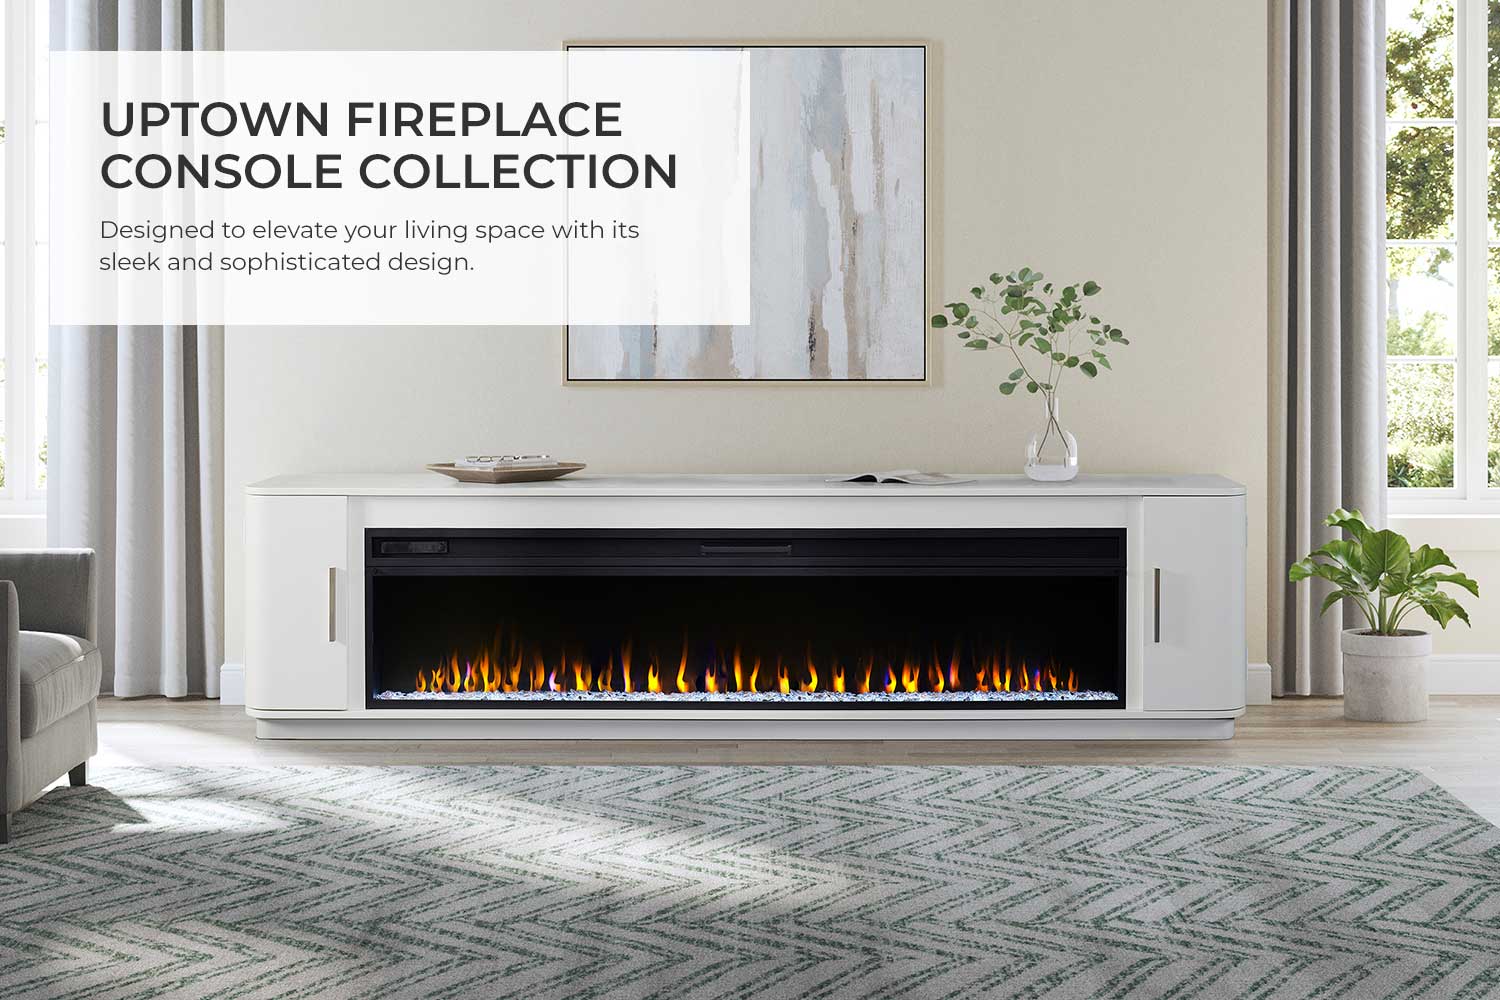 Uptown Fireplace Console Collection